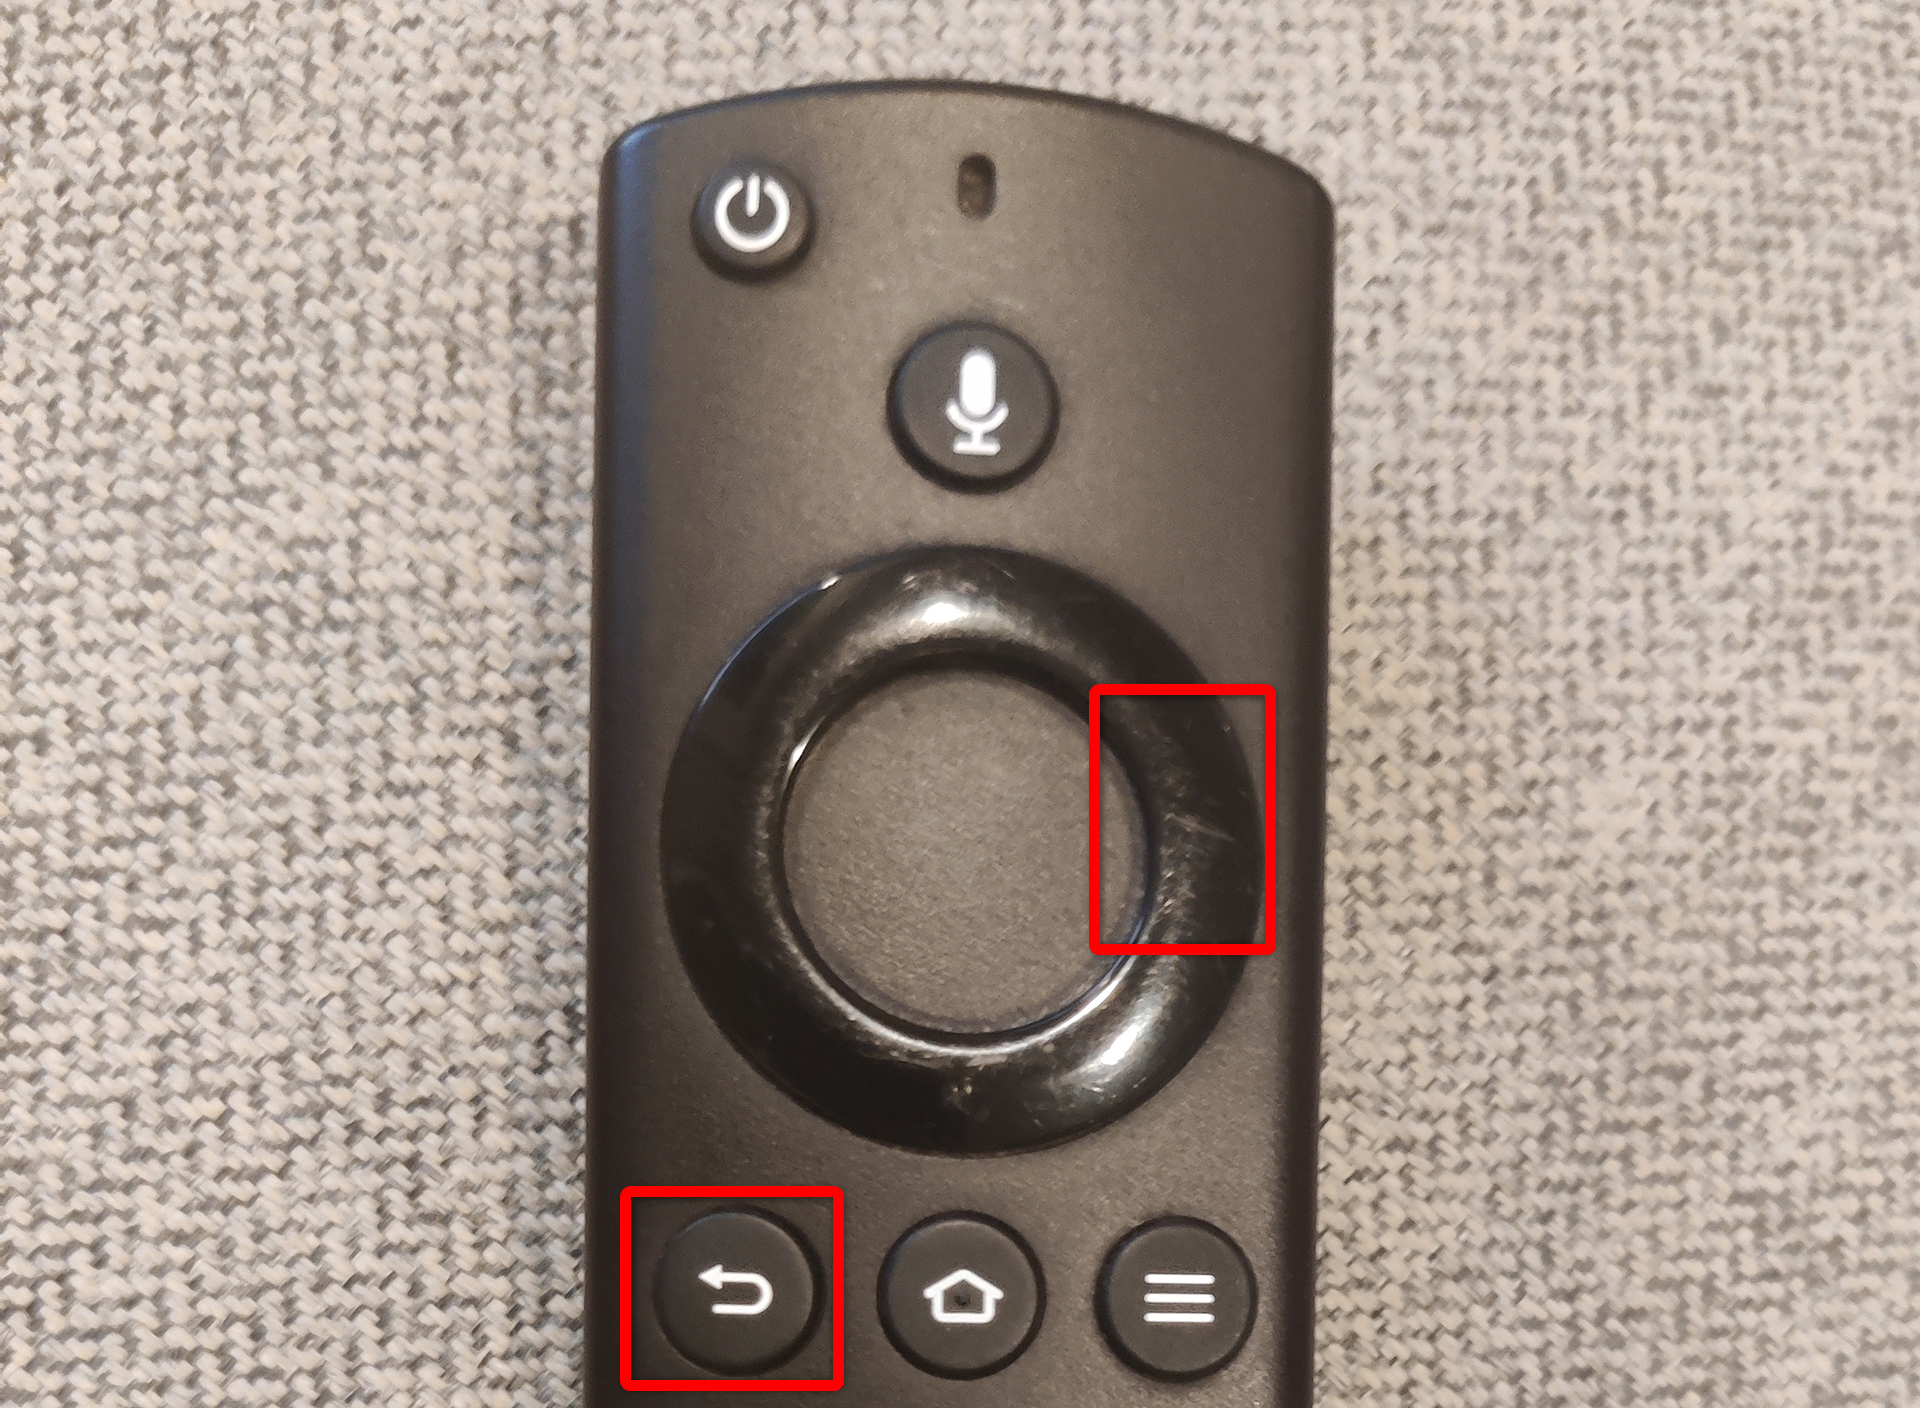 Right and Back buttons highlighted on a Fire TV Stick remote.